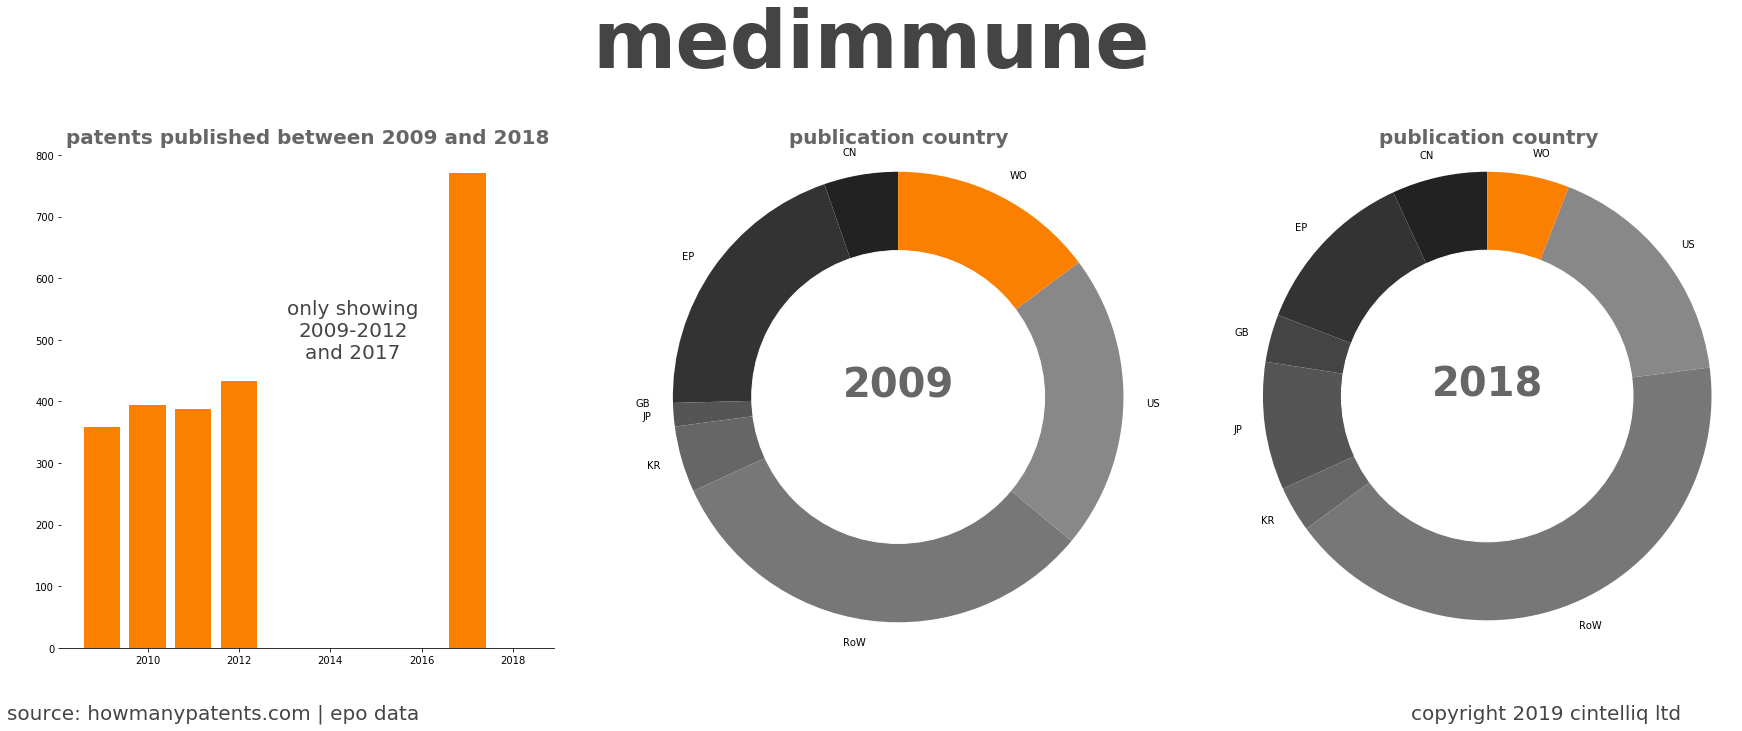 summary of patents for Medimmune